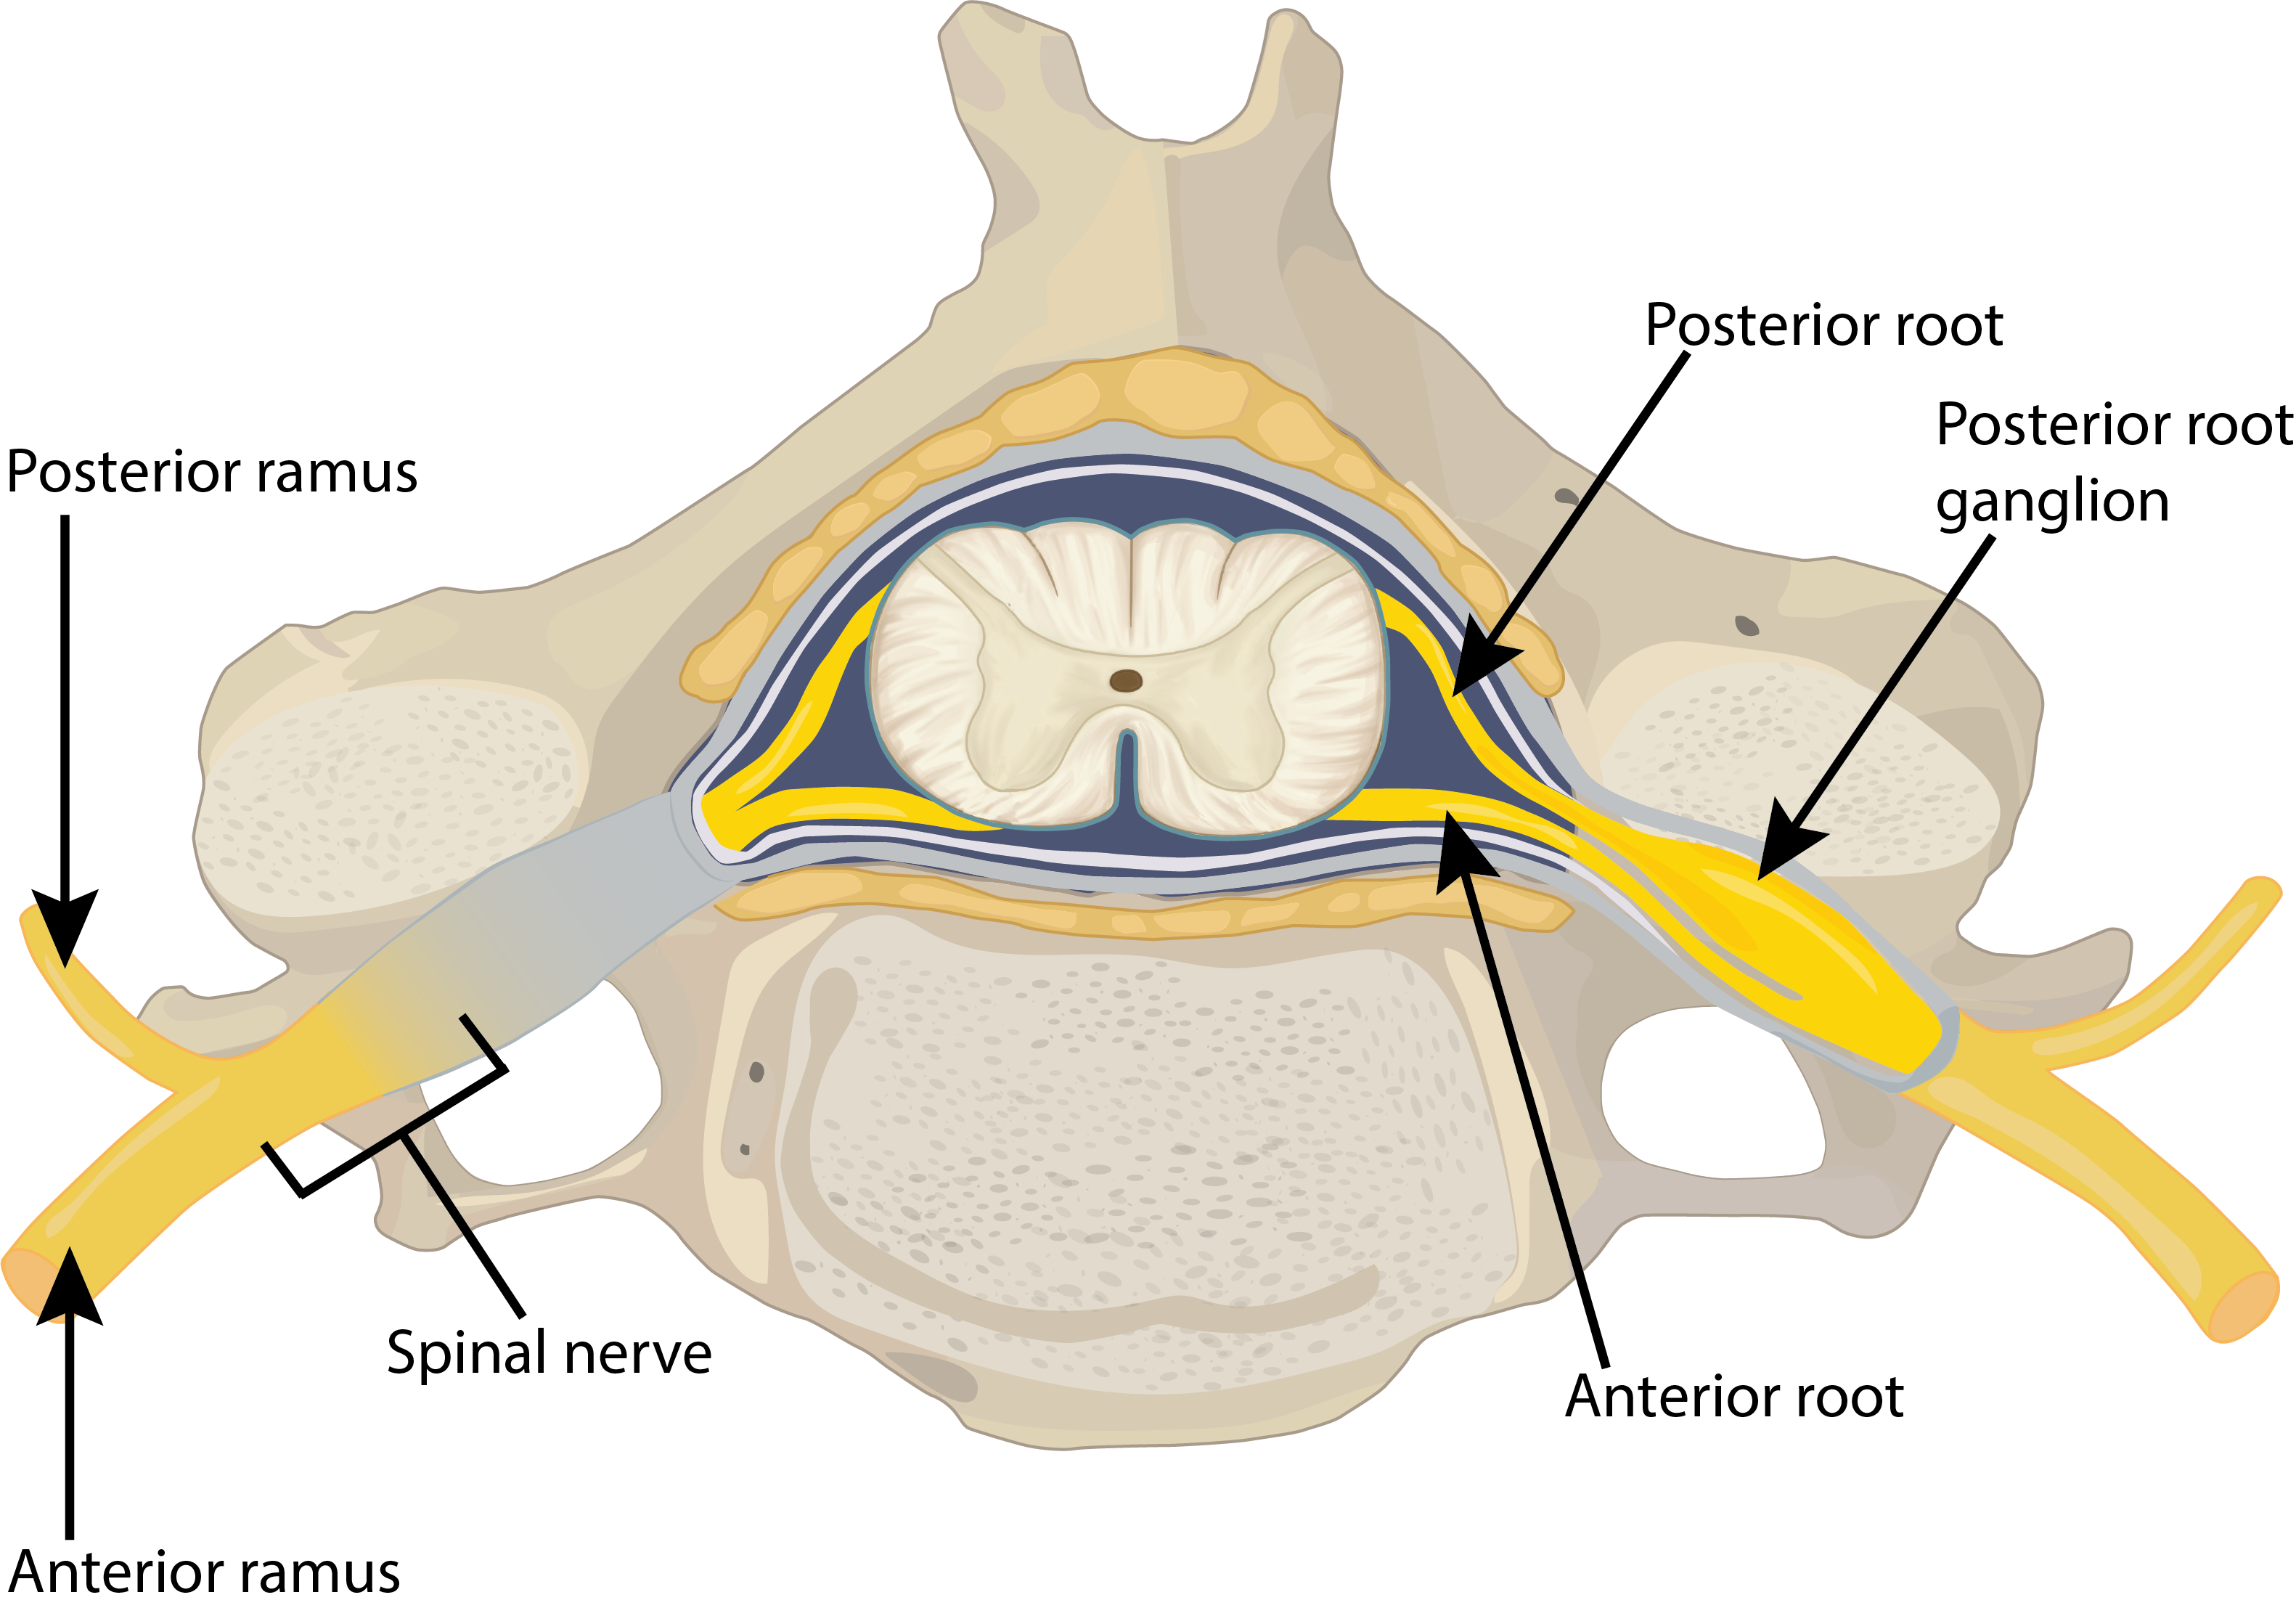 spinal cord and vertebra section with nerve branches labeled.png